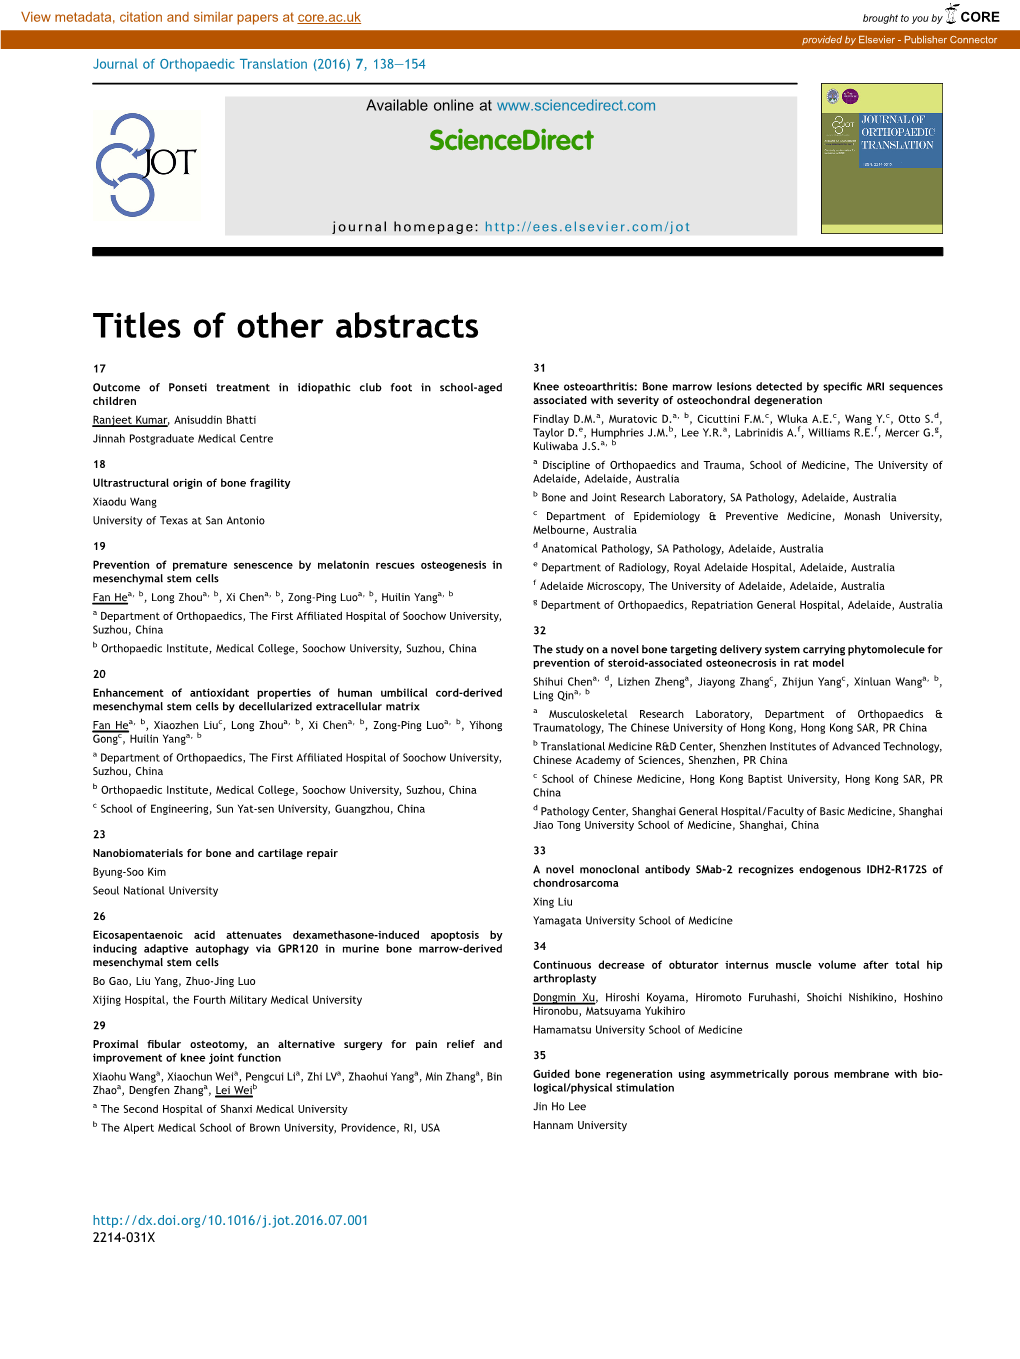 Titles of Other Abstracts